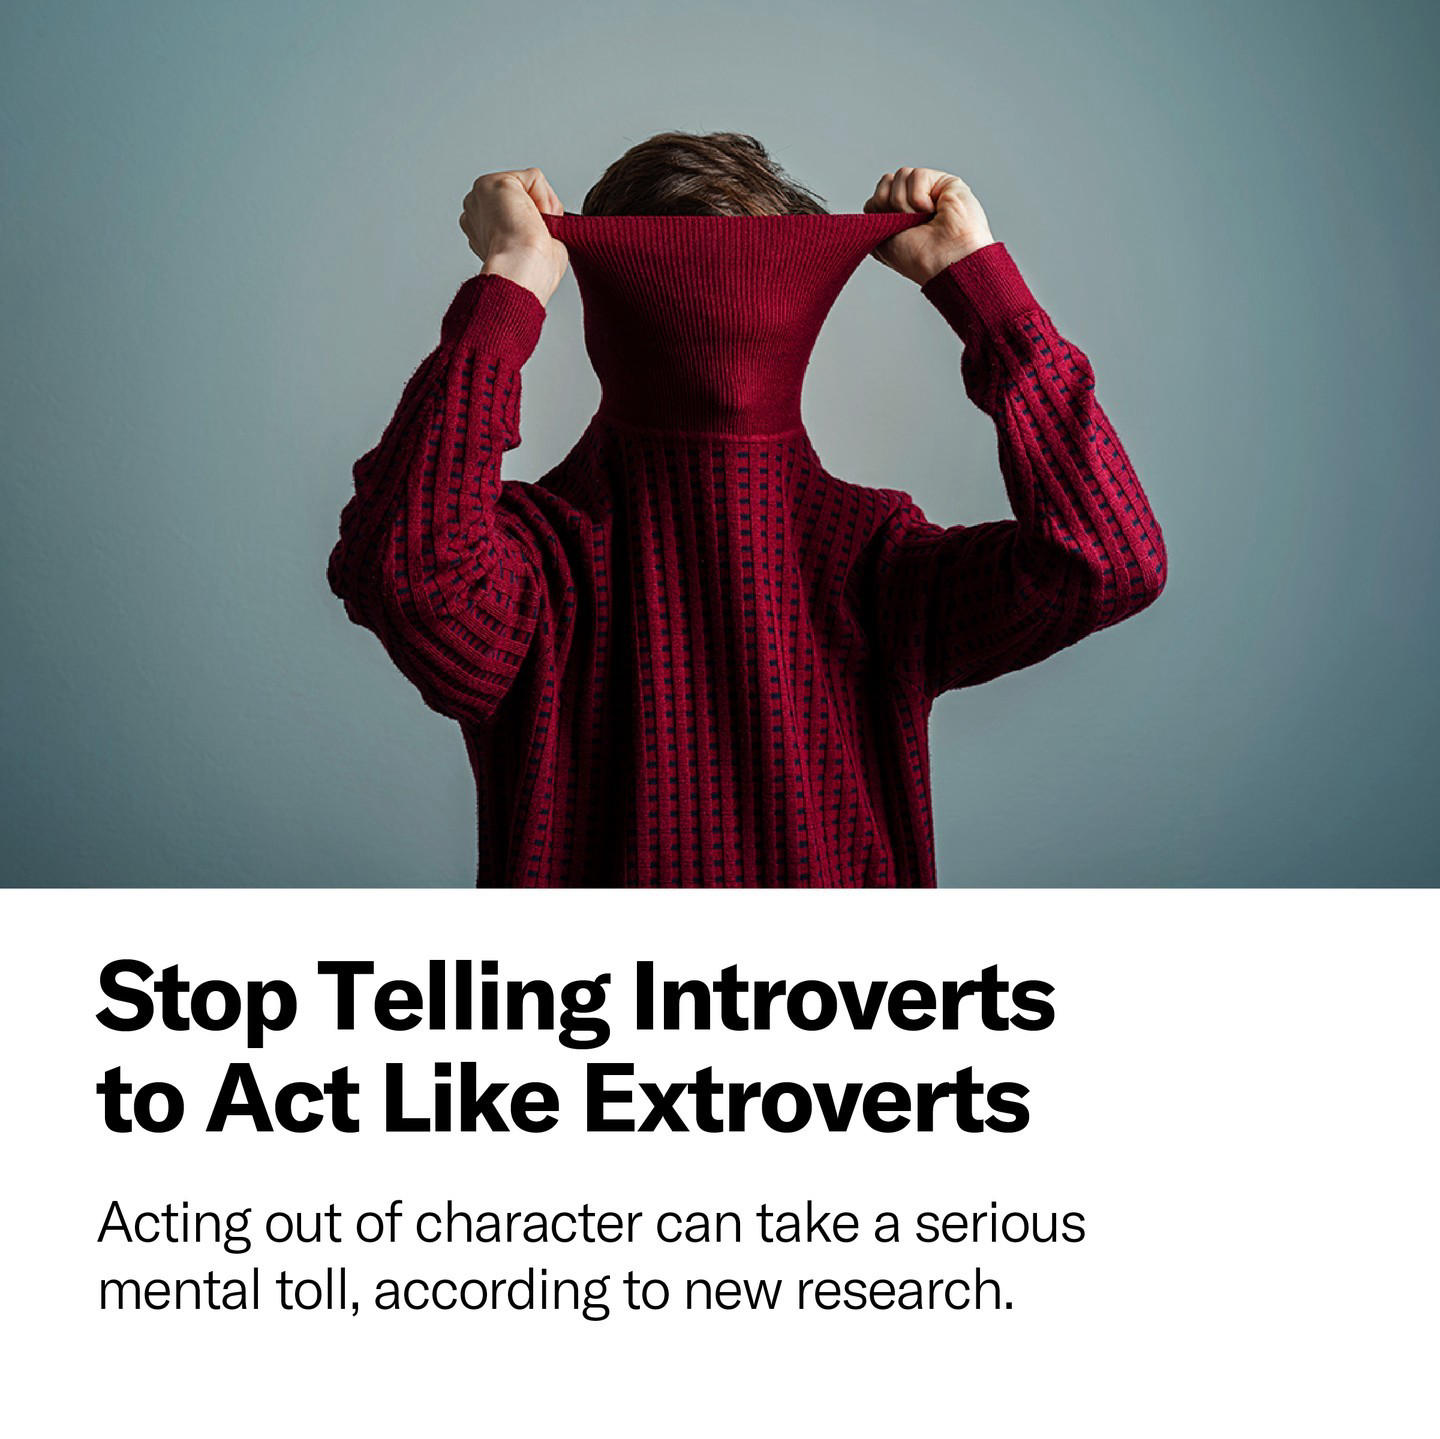 Harvard Business Review - It’s well known that engaging in extroverted activities — such as networki